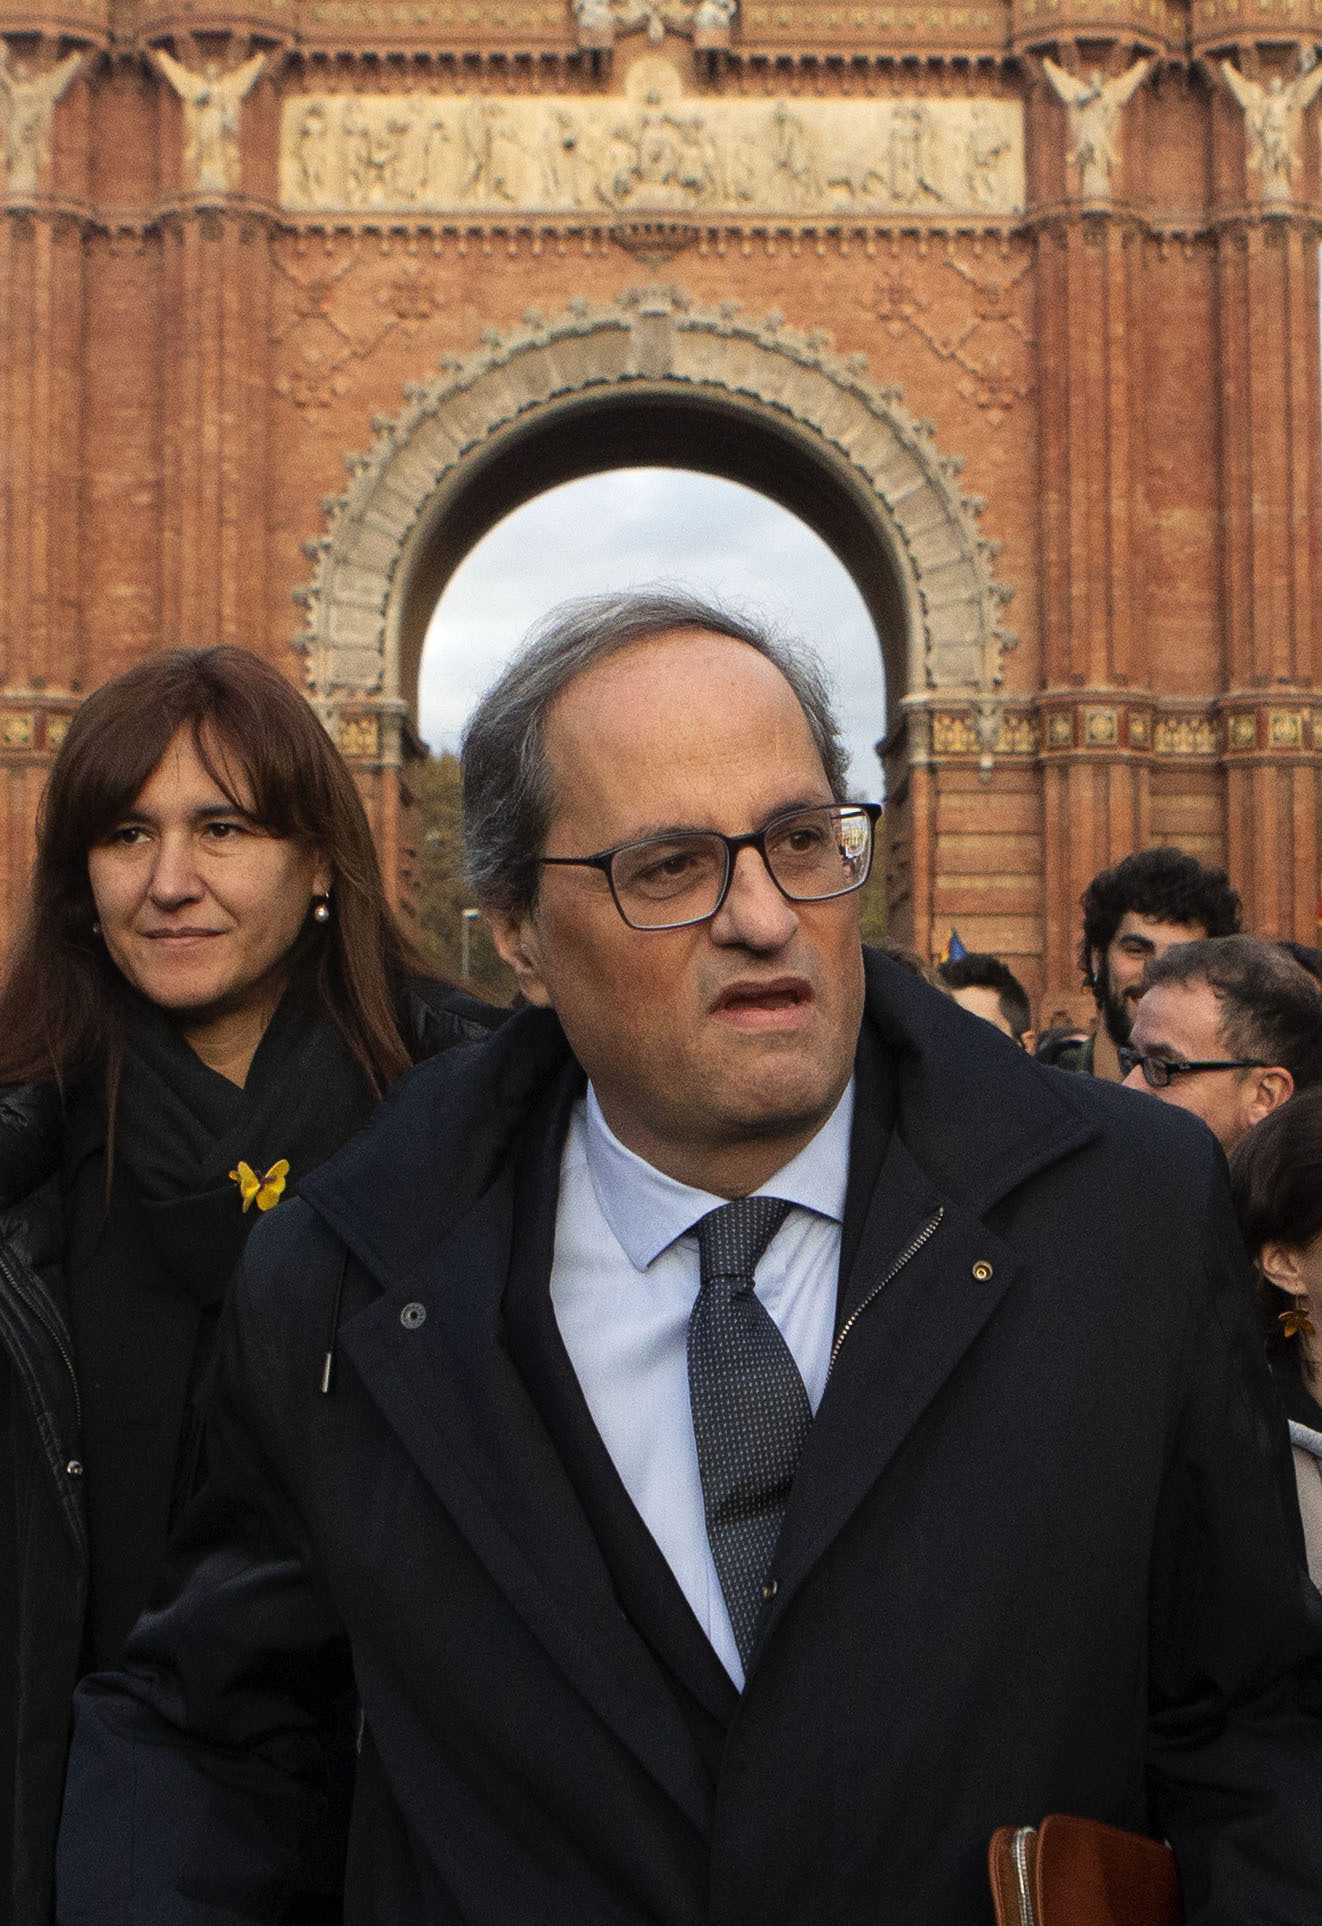 Catalan regional president Quim Torra walks to the Catalonia's high court in Barcelona, Spain, Monday, Nov.18, 2019. The pro-independence regional president of Catalonia is standing trial for allegedly disobeying Spain's electoral board by not removing pro-secession symbols from public buildings during an election campaign. (AP Photo/Joan Mateu)
Quim Torra Spain Catalonia